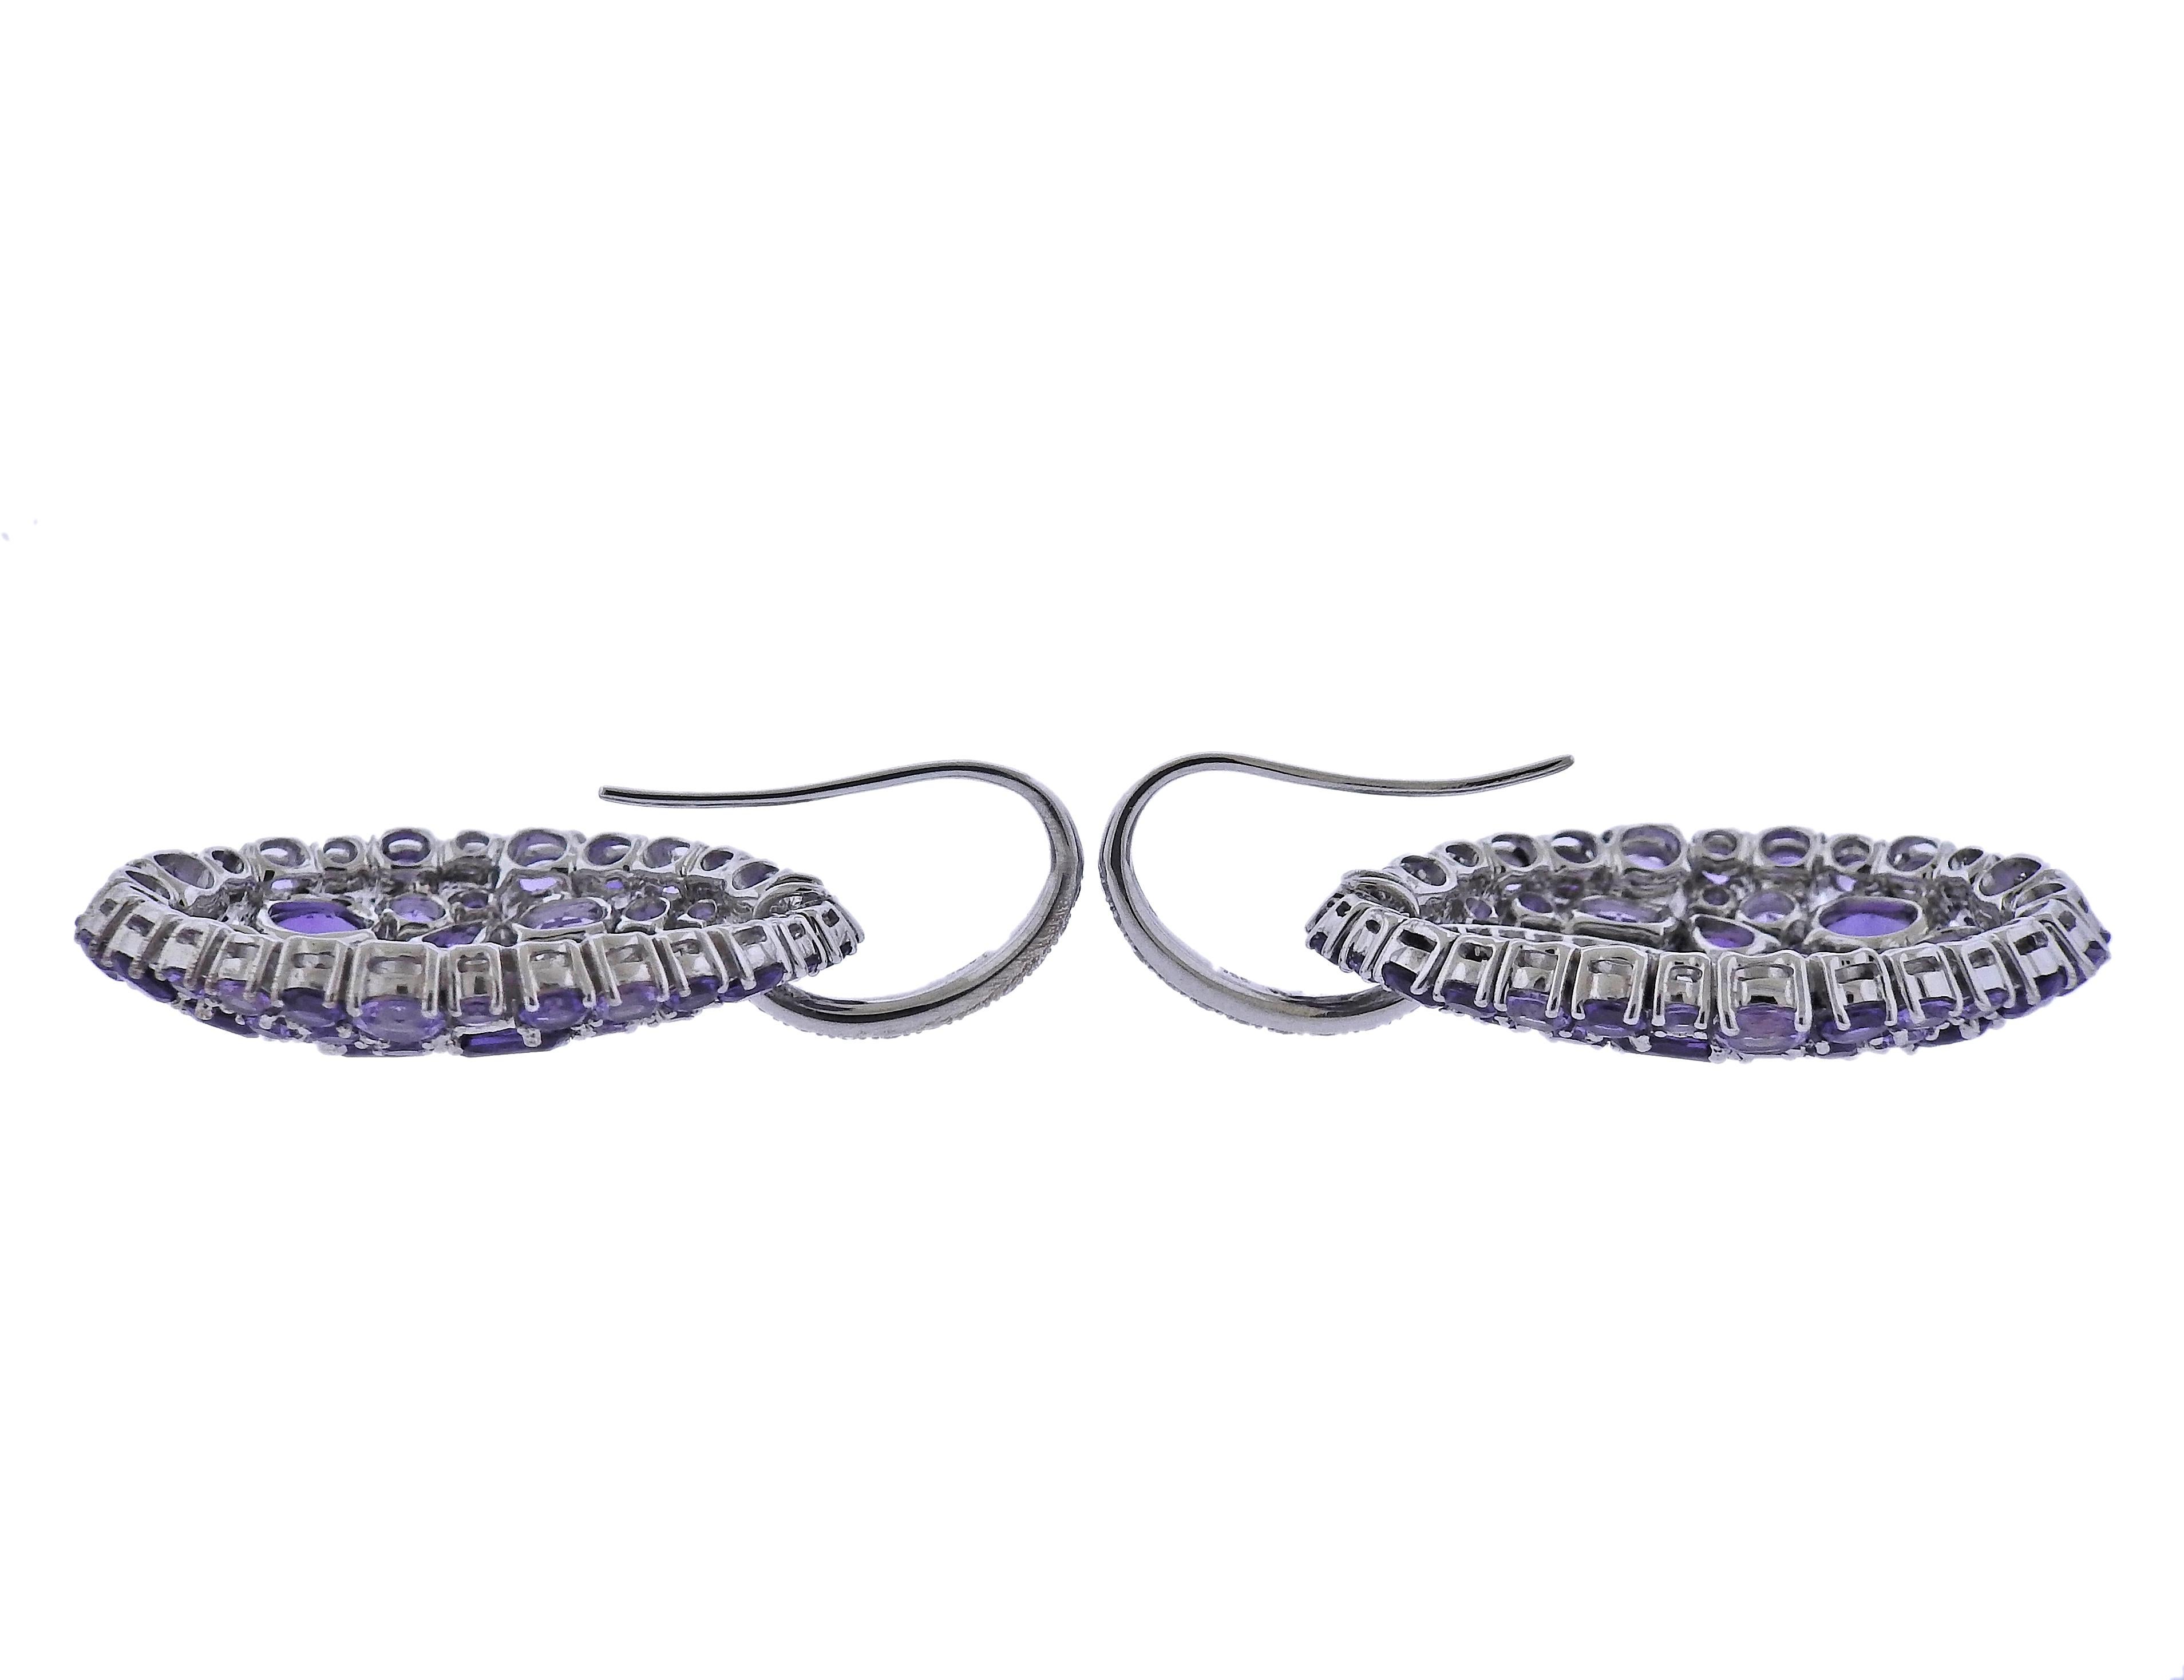 Brand new with tag Bucherer earrings in 18k gold, set with 0.73ctw VS/H diamond and 8.97ctw in amethyst. Retail $7100. Comes with box. Earrings are 42mm x 25mm. Weight - 17.3 grams. Marked: CB 750.